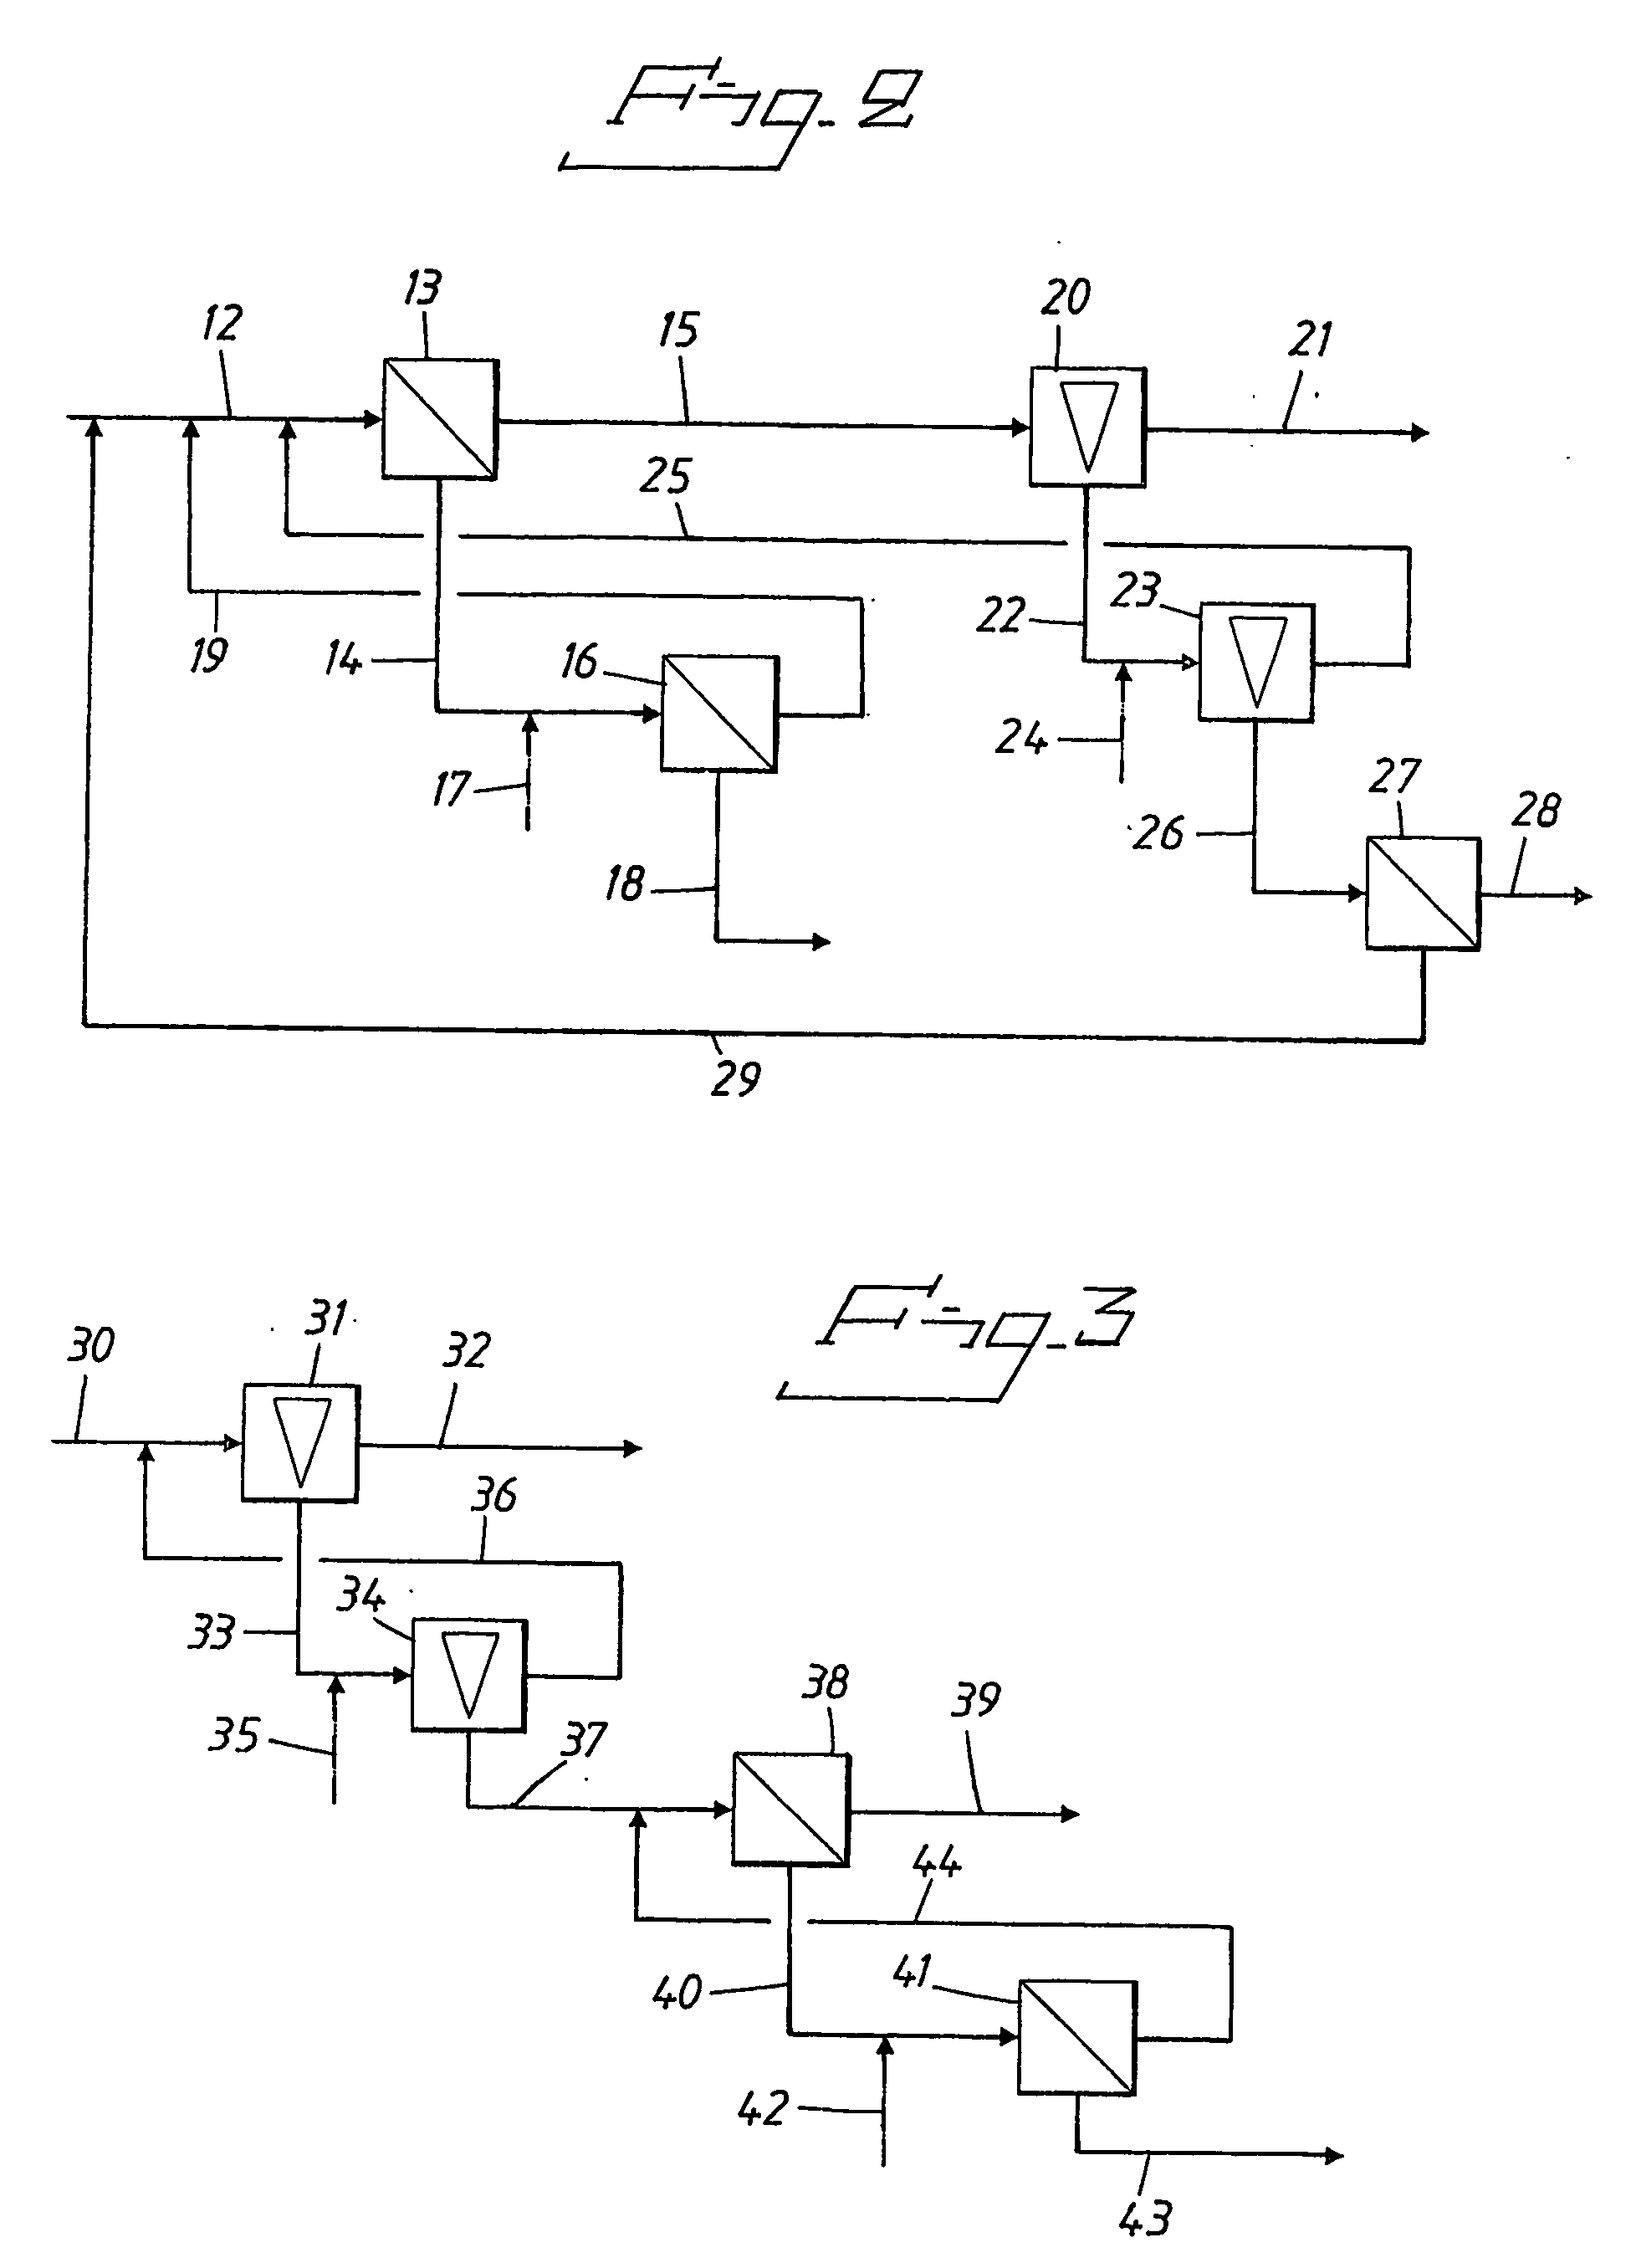 Method for selective removal of ray cells from cellulose pulp